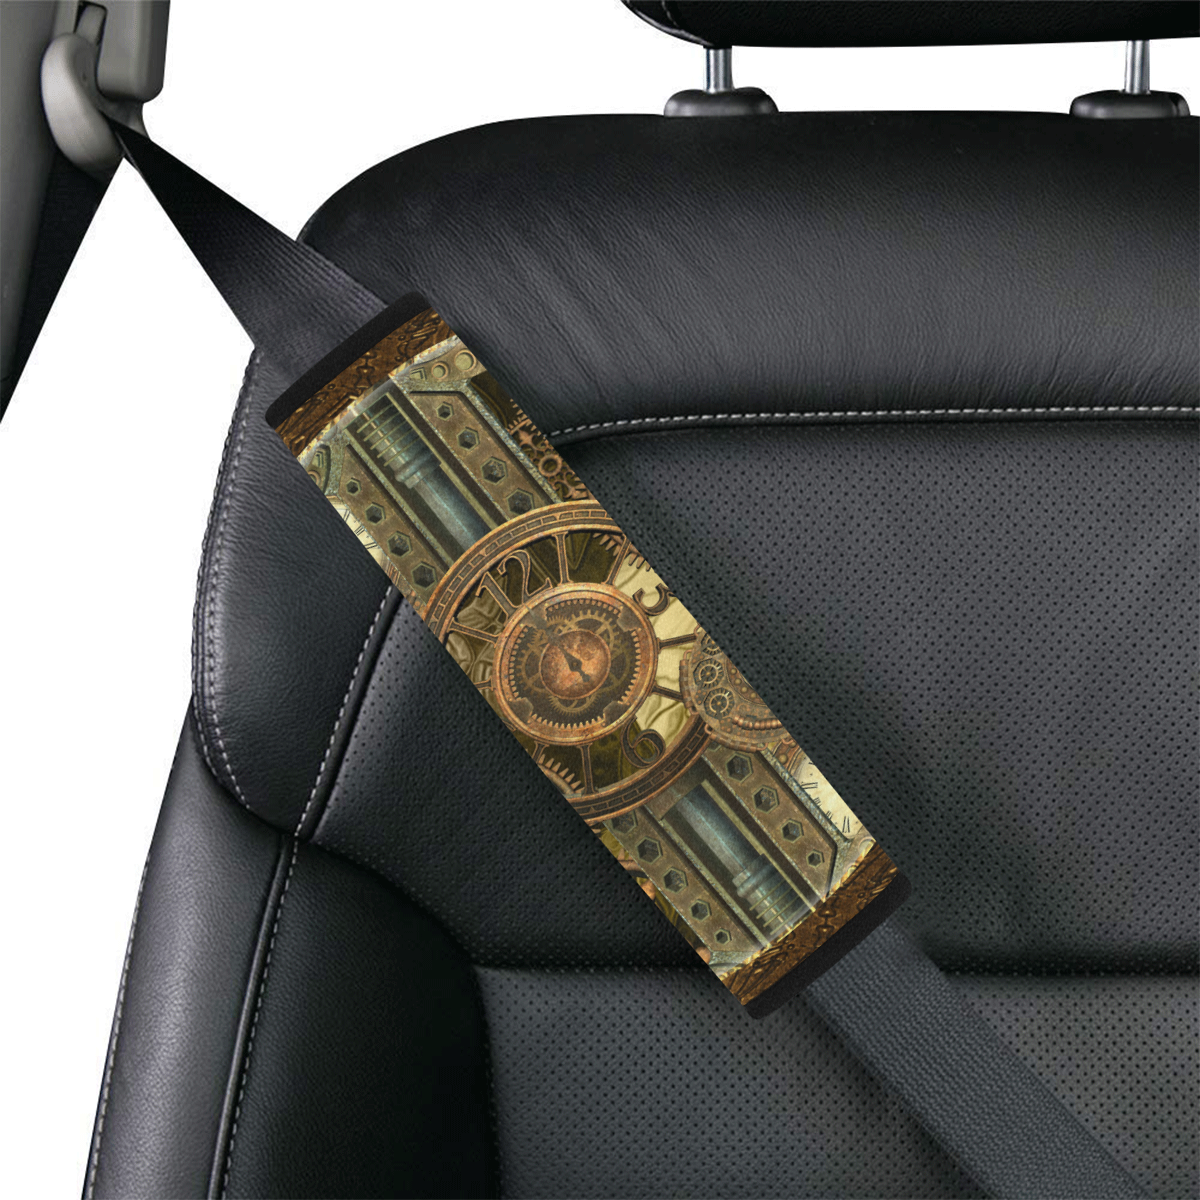 Steampunk clocks and gears Car Seat Belt Cover 7''x10''